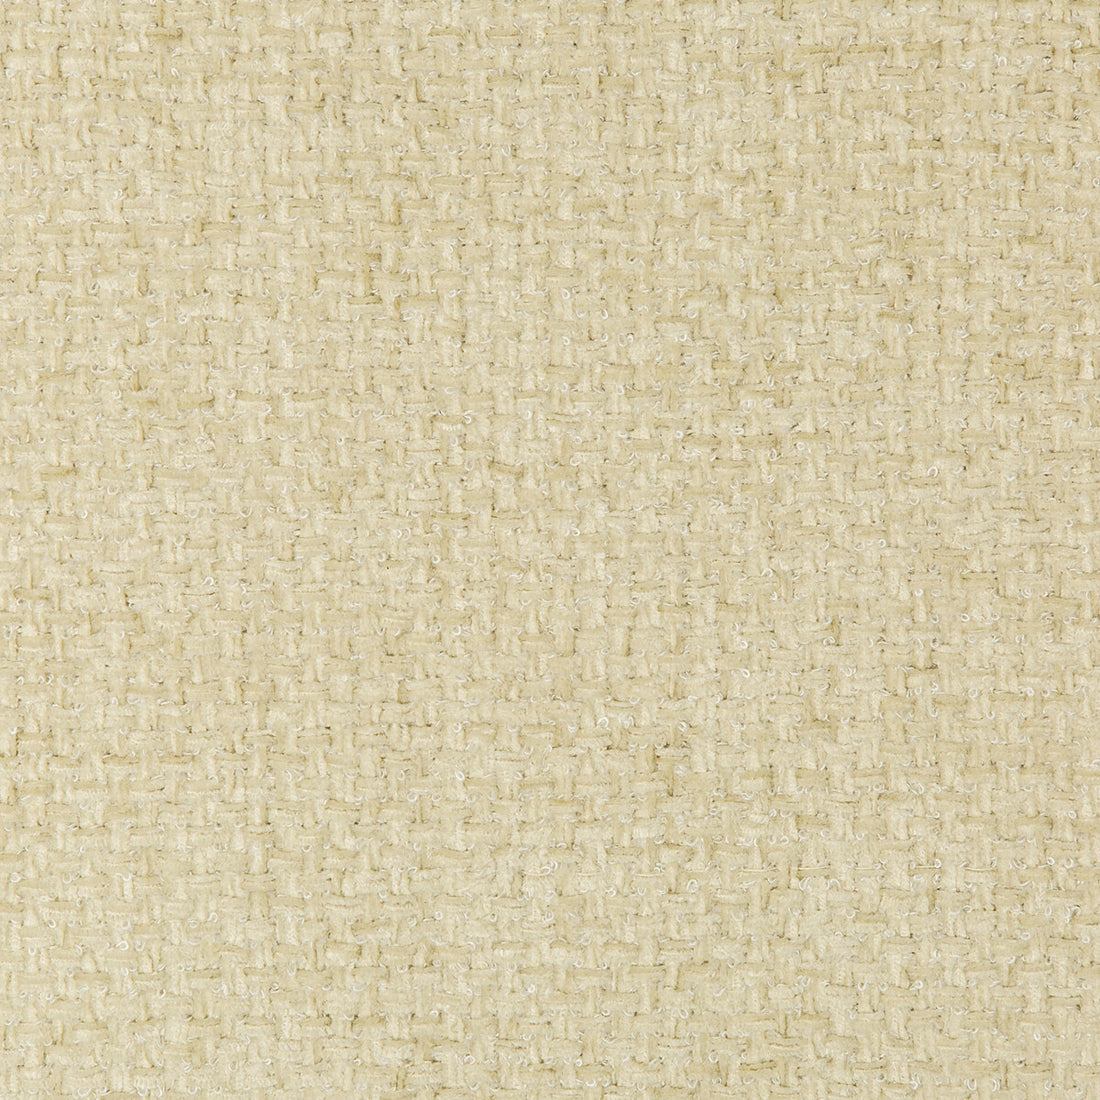 Arly Texture fabric in pearl color - pattern 8019143.1.0 - by Brunschwig &amp; Fils in the Chambery Textures II collection